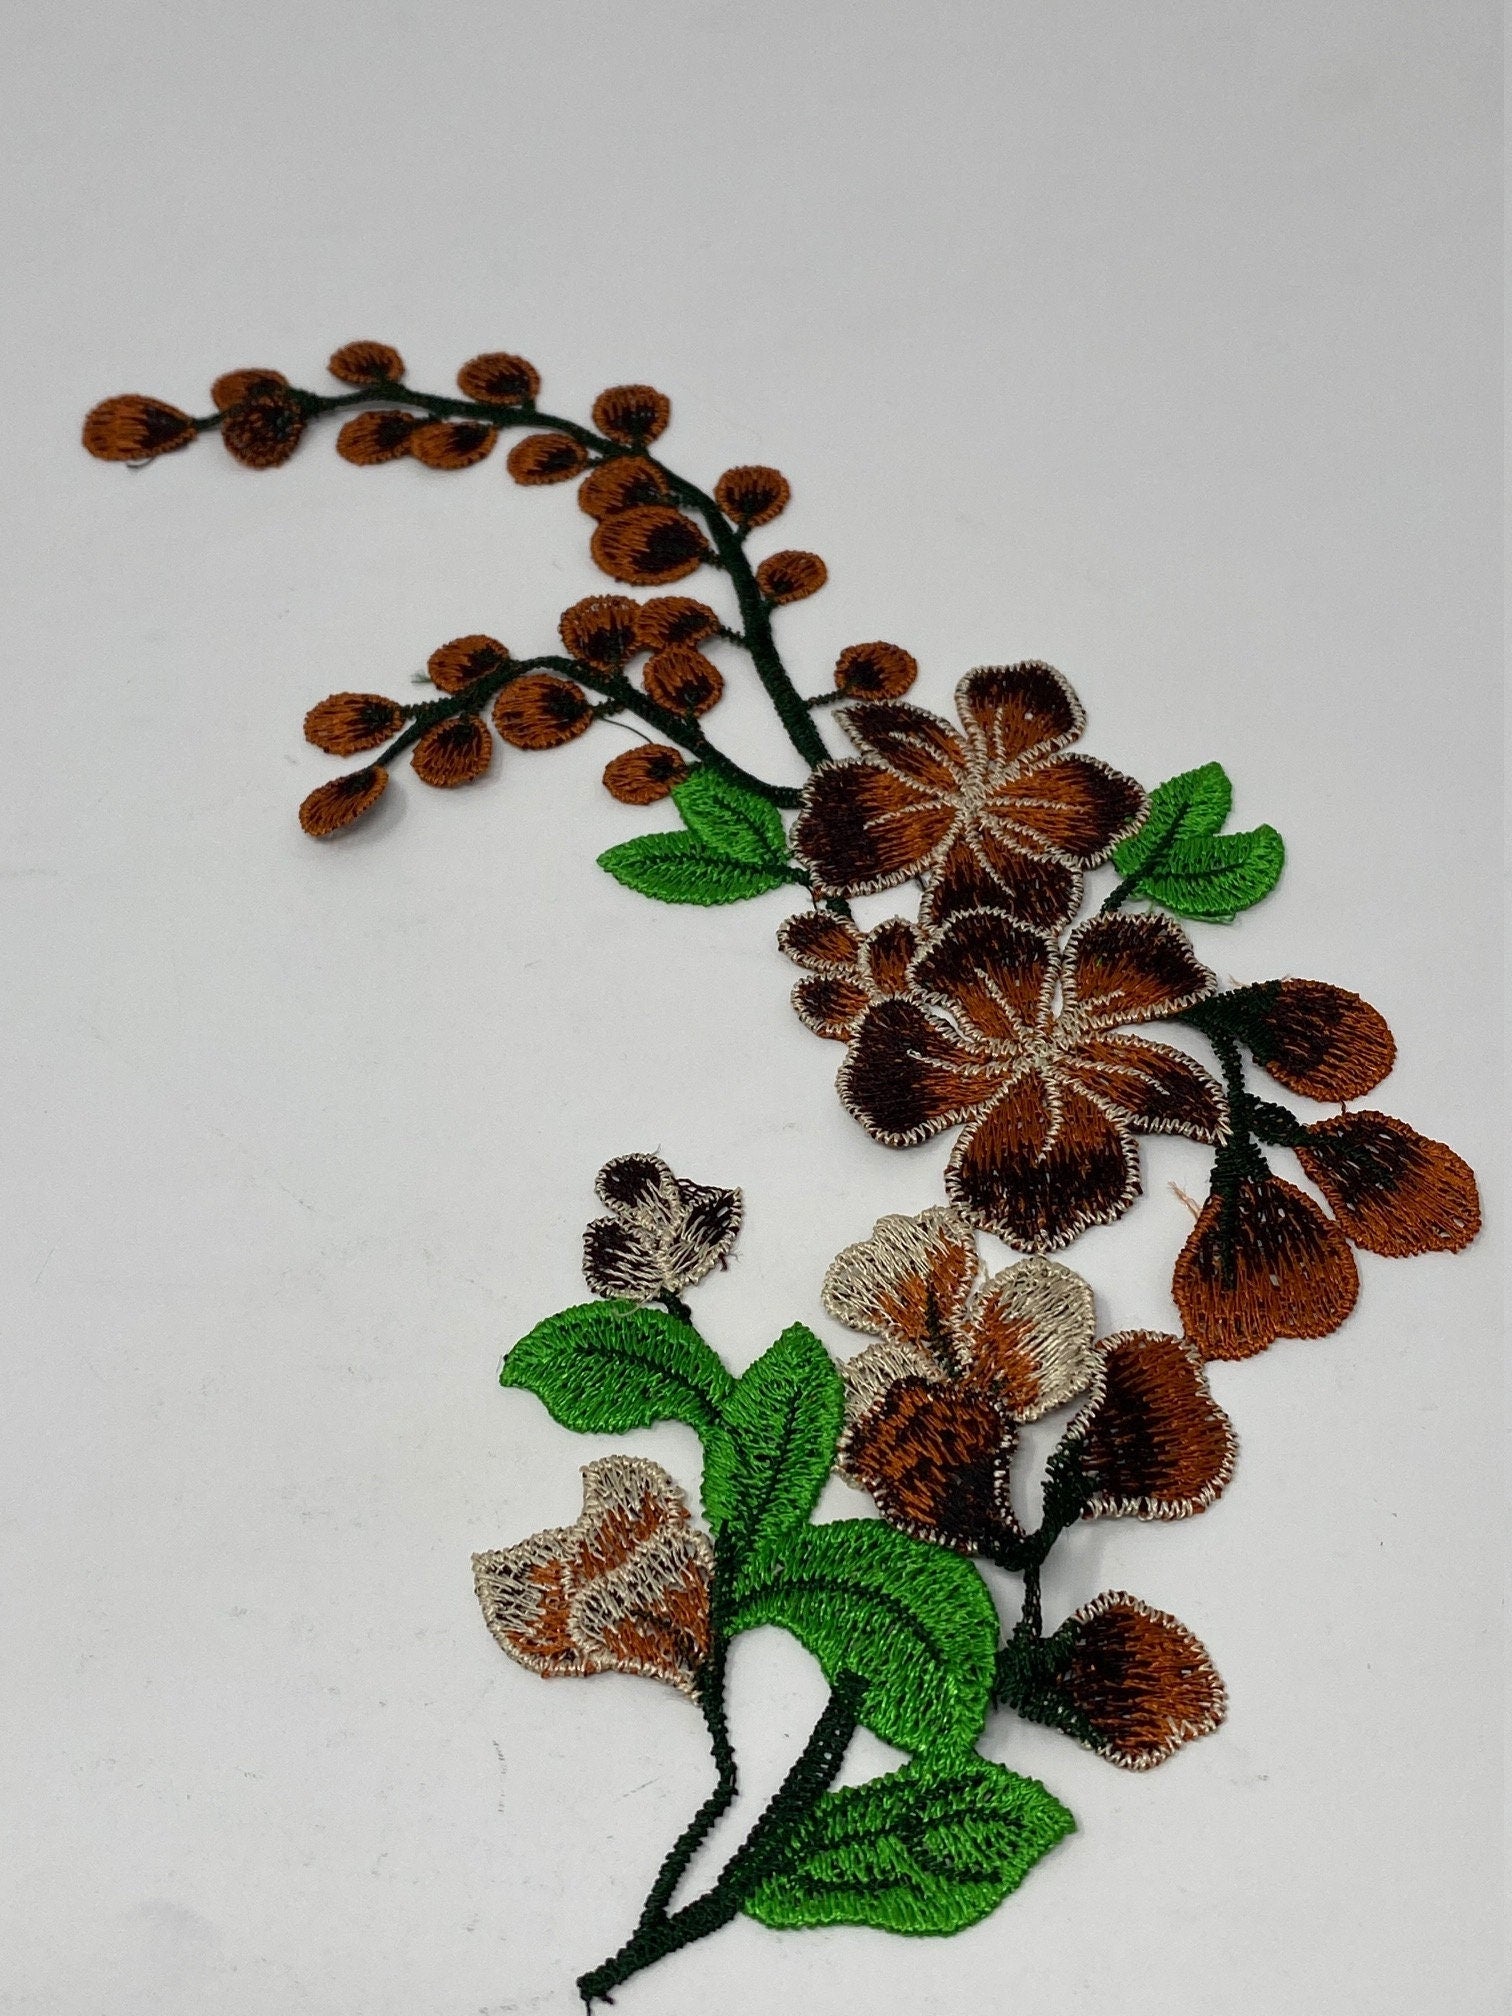 NEW, 2 Pc., Brown Lace Flowers with Leaves and Stems, Sew-on Lace Flower Set, Great for Shoes, Denim,Jackets, Sweaters, Etc. Size 12 inches